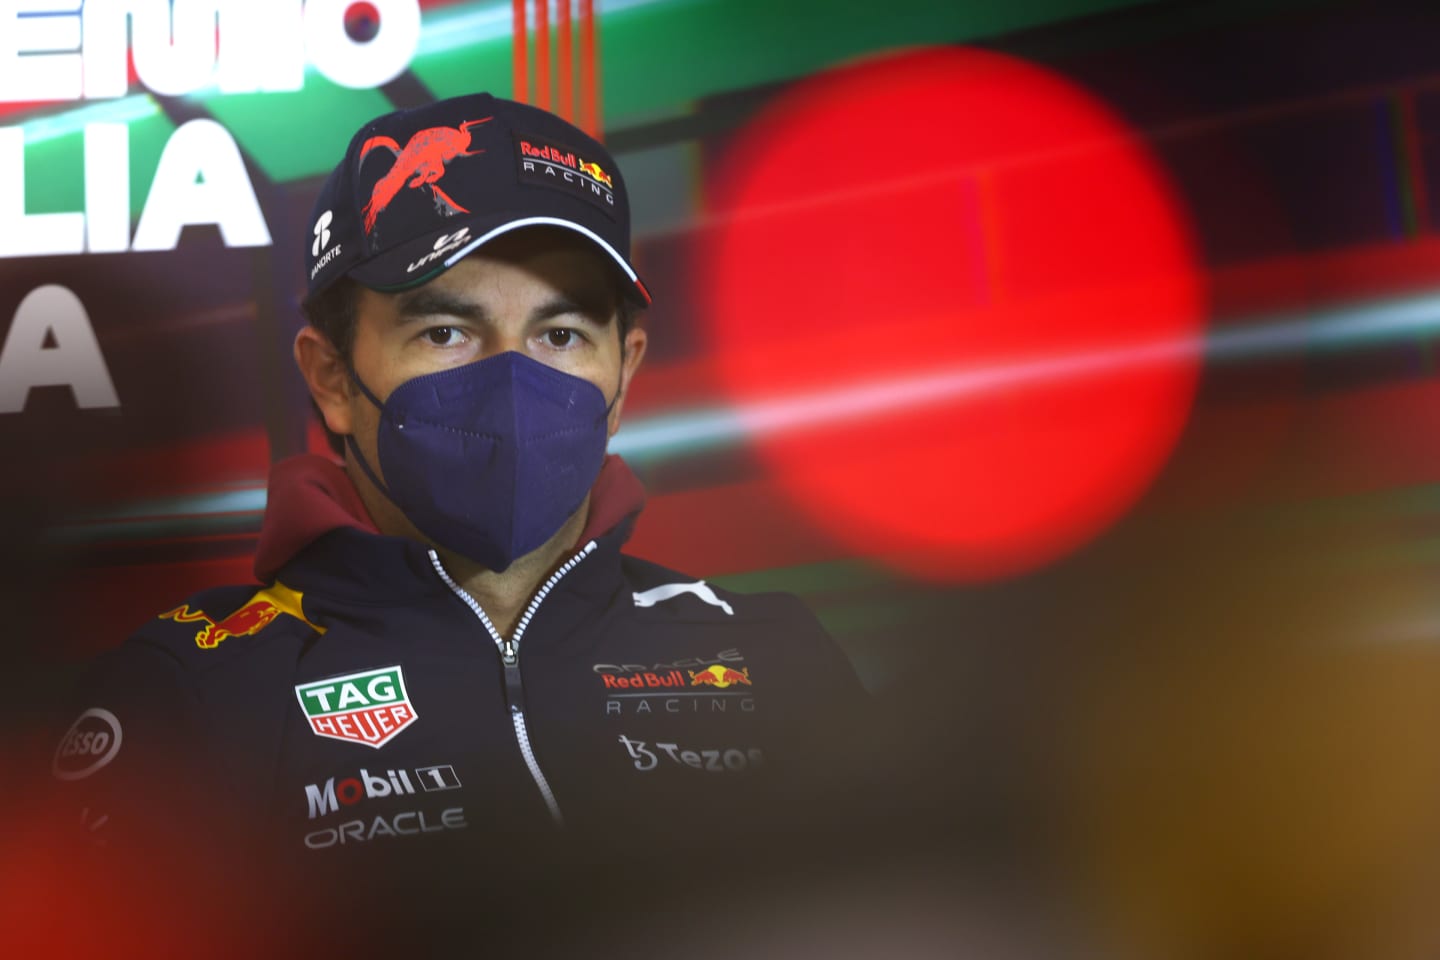 IMOLA, ITALY - APRIL 22: Sergio Perez of Mexico and Oracle Red Bull Racing looks on in the Drivers Press Conference prior to practice ahead of the F1 Grand Prix of Emilia Romagna at Autodromo Enzo e Dino Ferrari on April 22, 2022 in Imola, Italy. (Photo by Lars Baron/Getty Images)